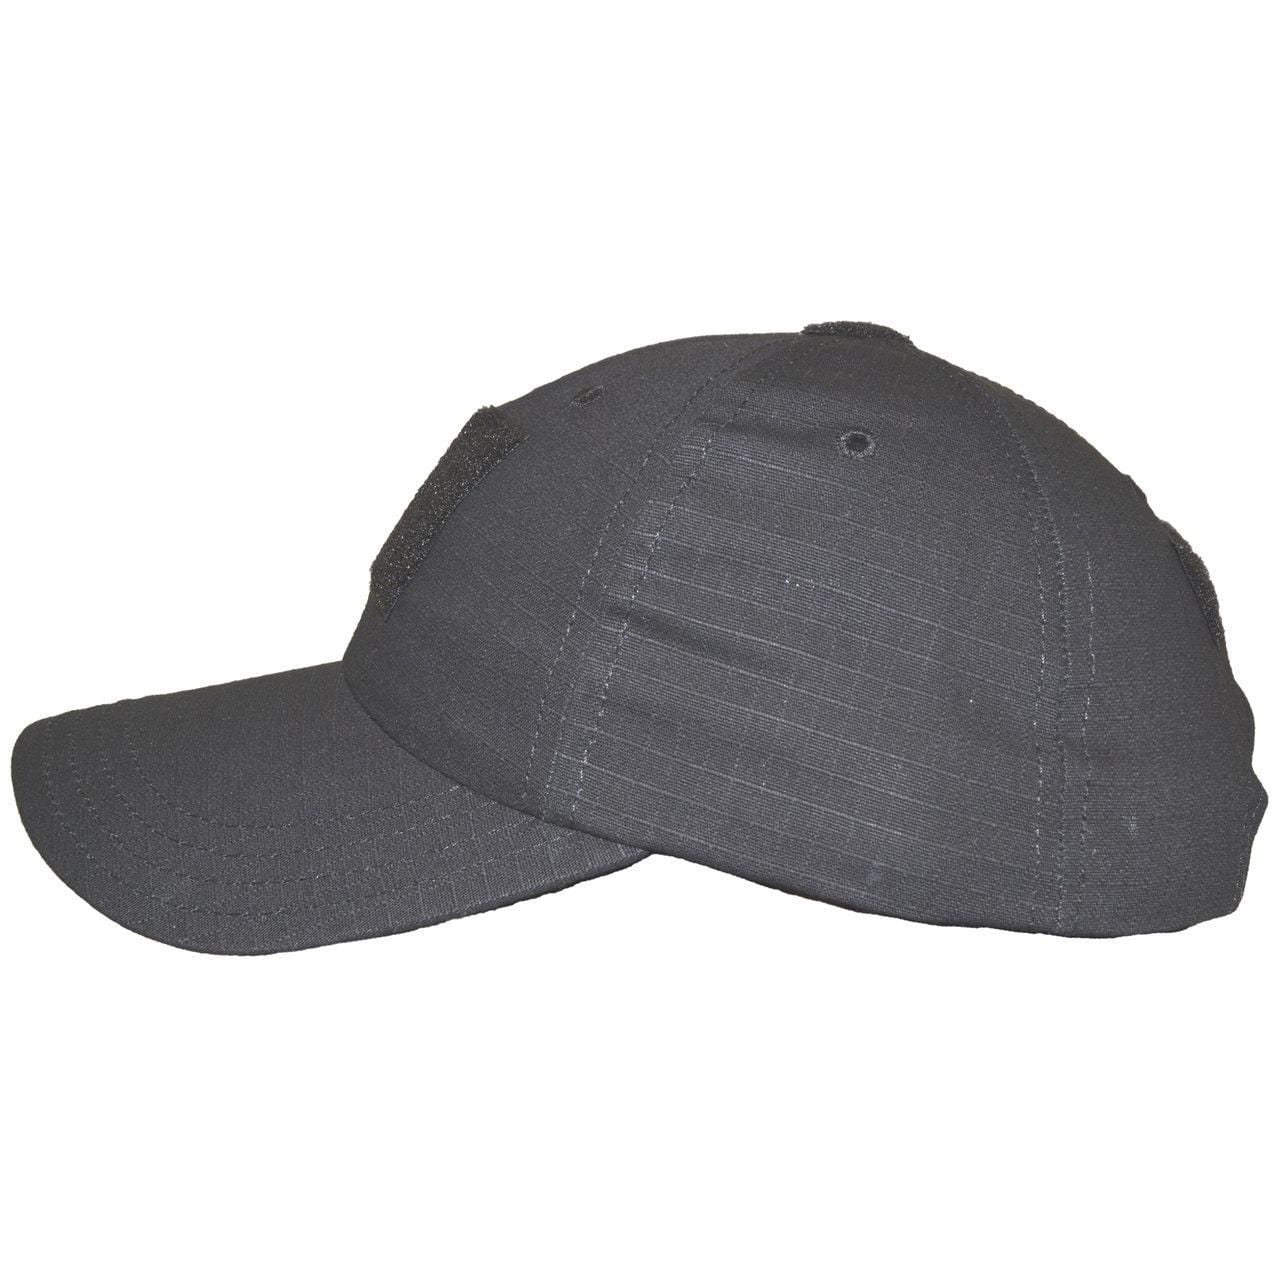 Tactical Gear Junkie Apparel Tactical Gear Junkie American Made Tactical Operator Hat